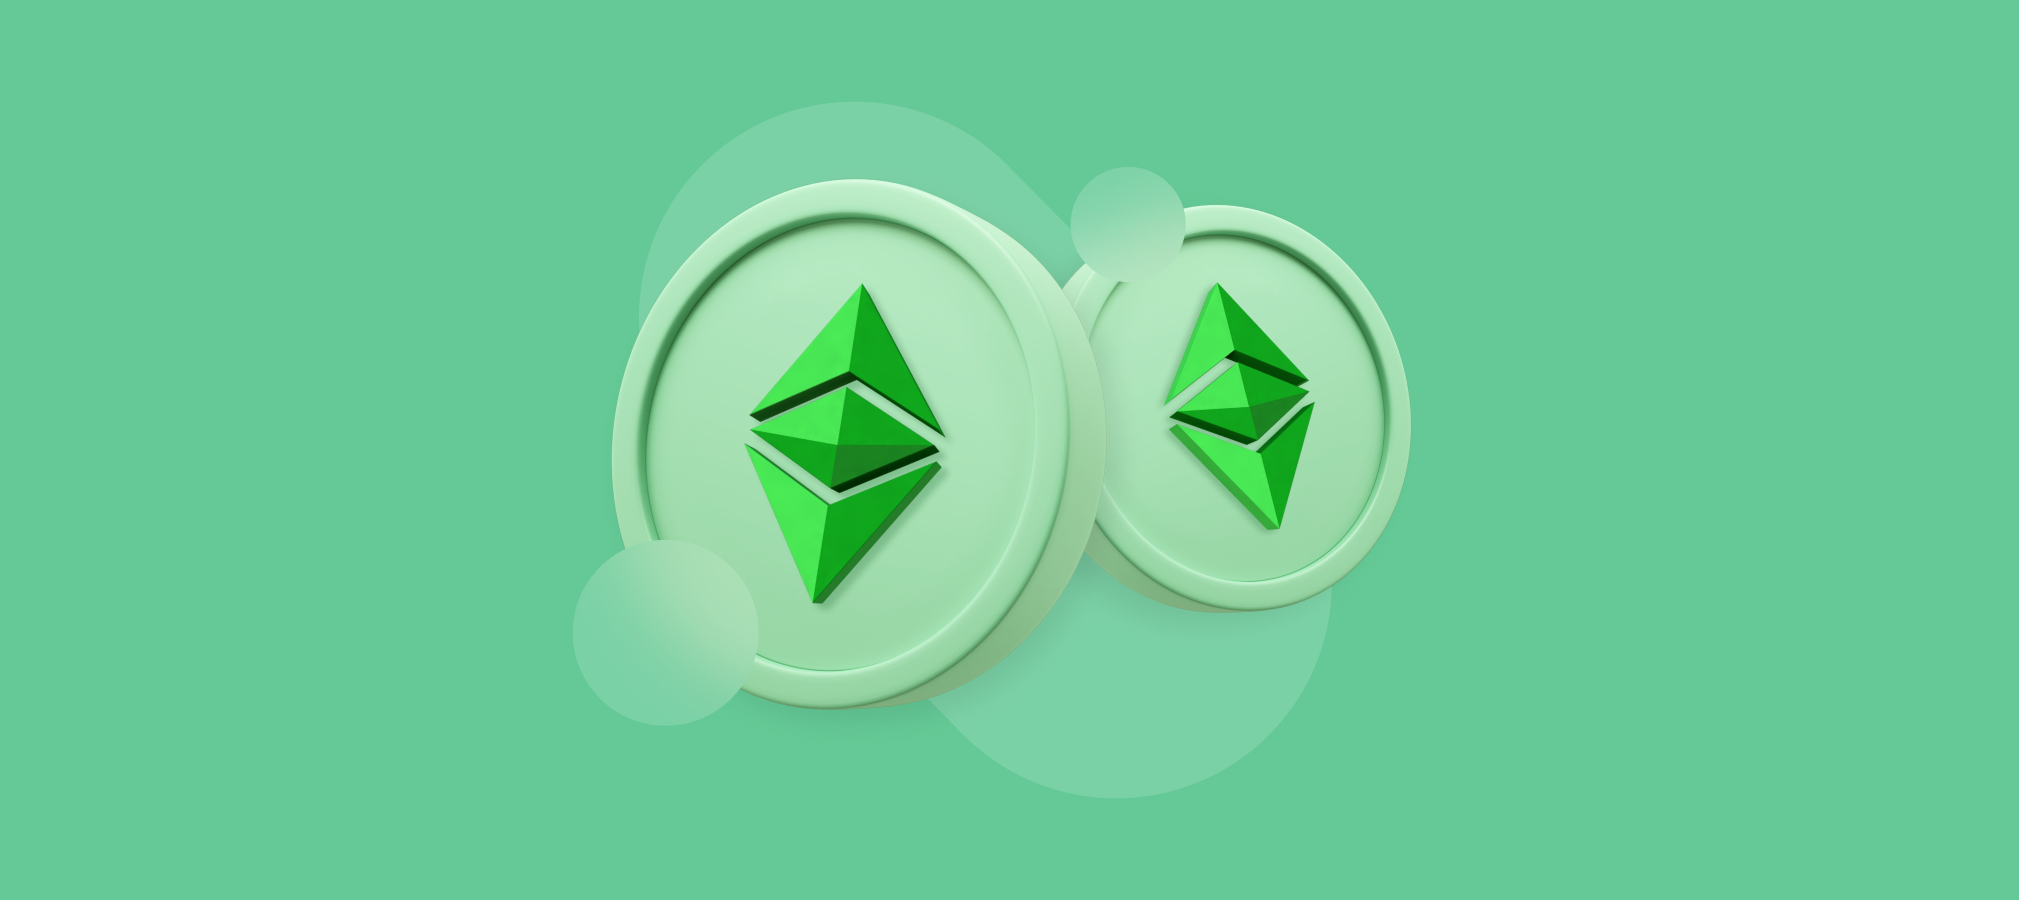 What Is Ethereum Classic?